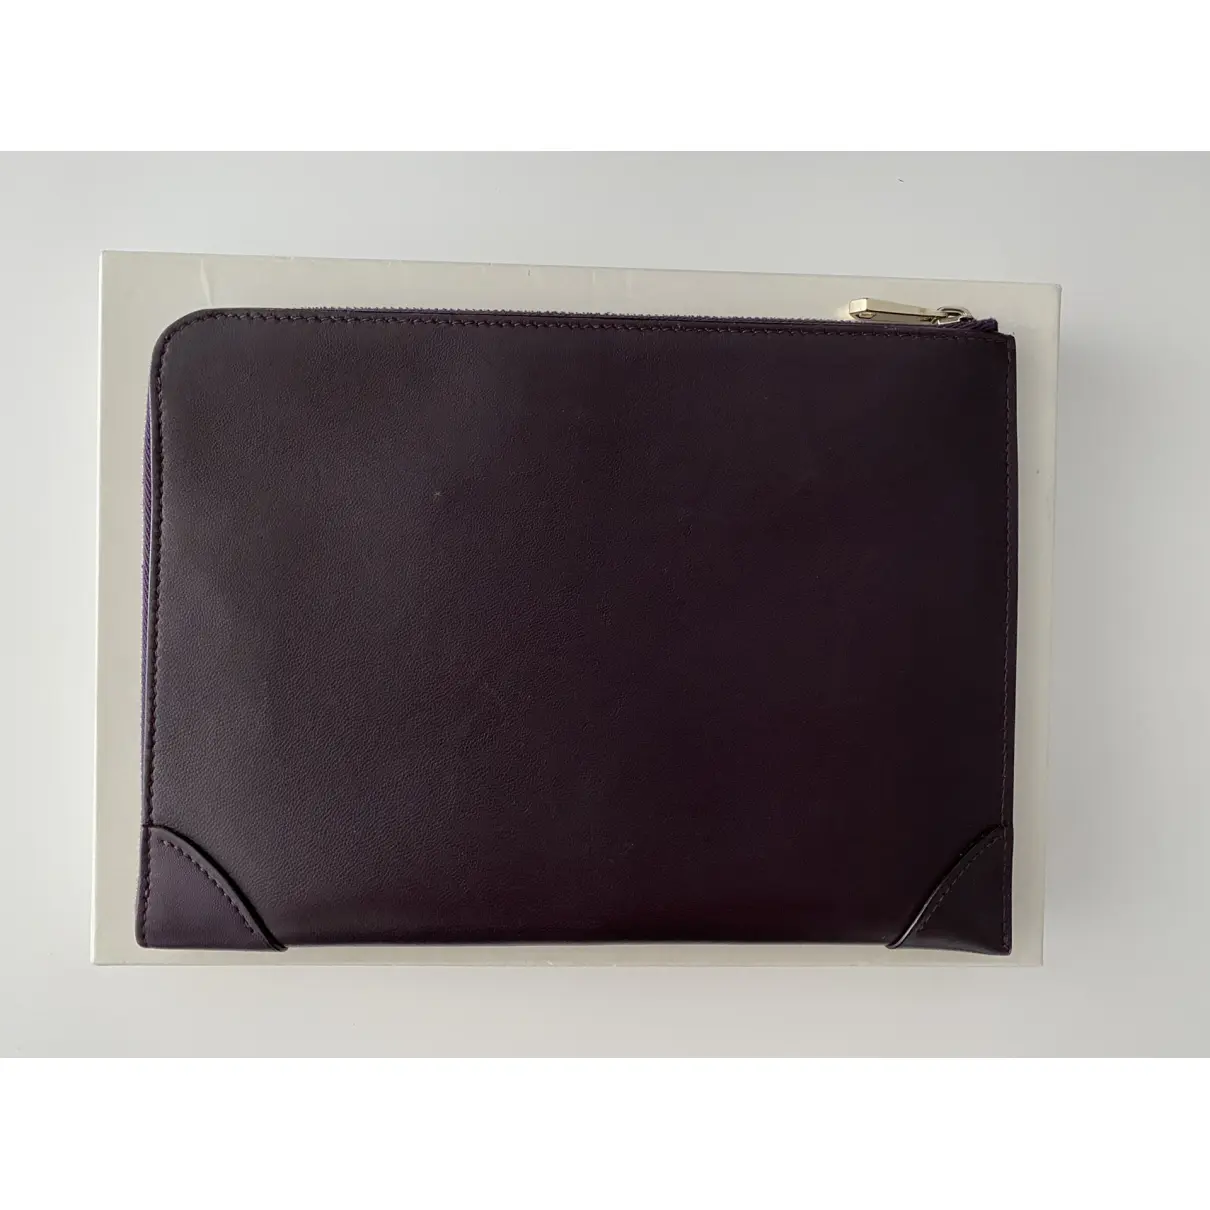 Buy Givenchy Lucrezia leather clutch bag online